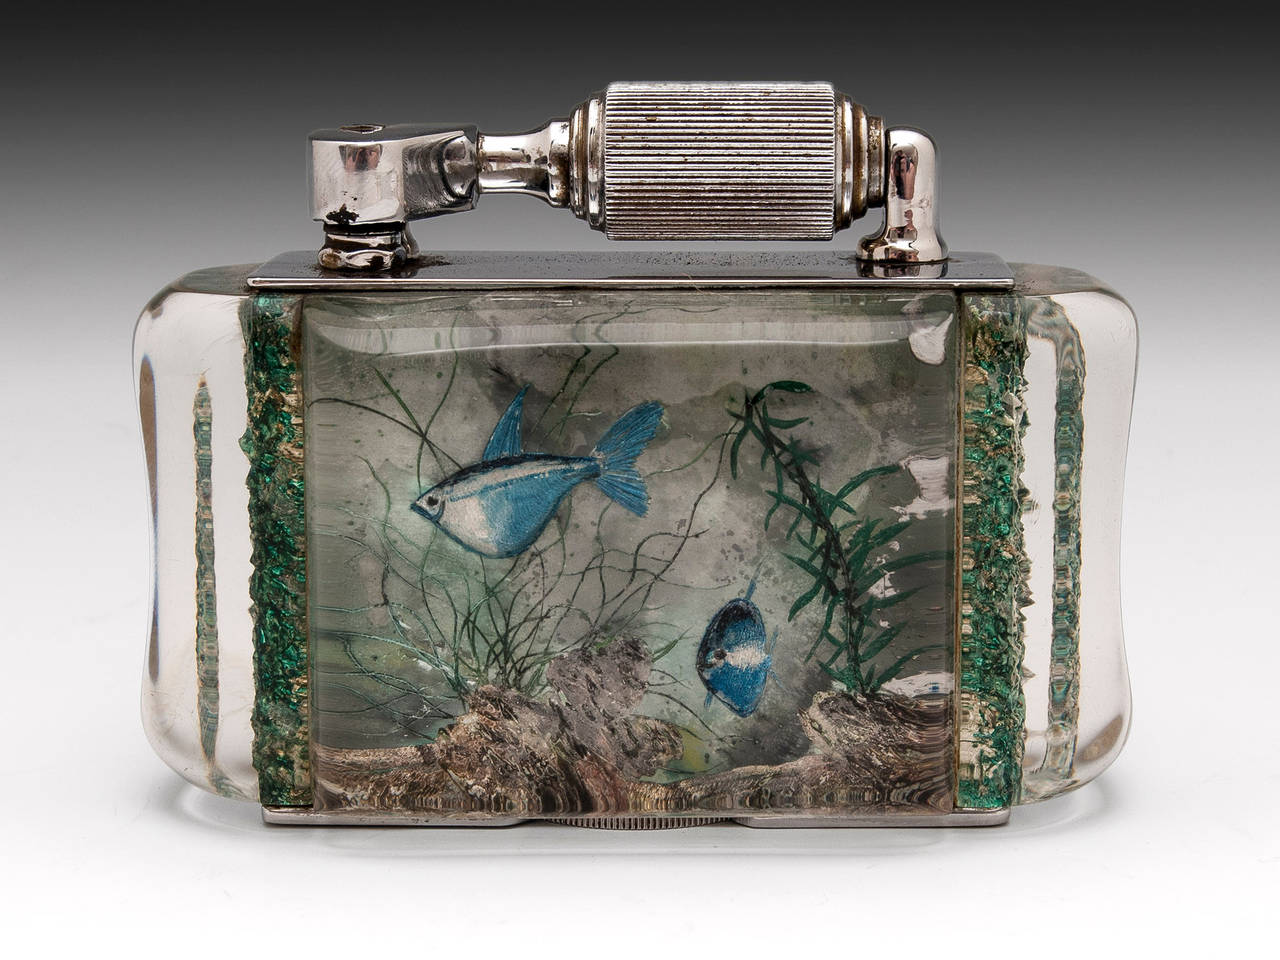 Aquarium table cigarette lighter by McMurdo. 
McMurdo was a former designer for Dunhill. 

This half-giant size lighter features reverse carved and painted Lucite panels with decoration of fish swimming underwater and features silver plate